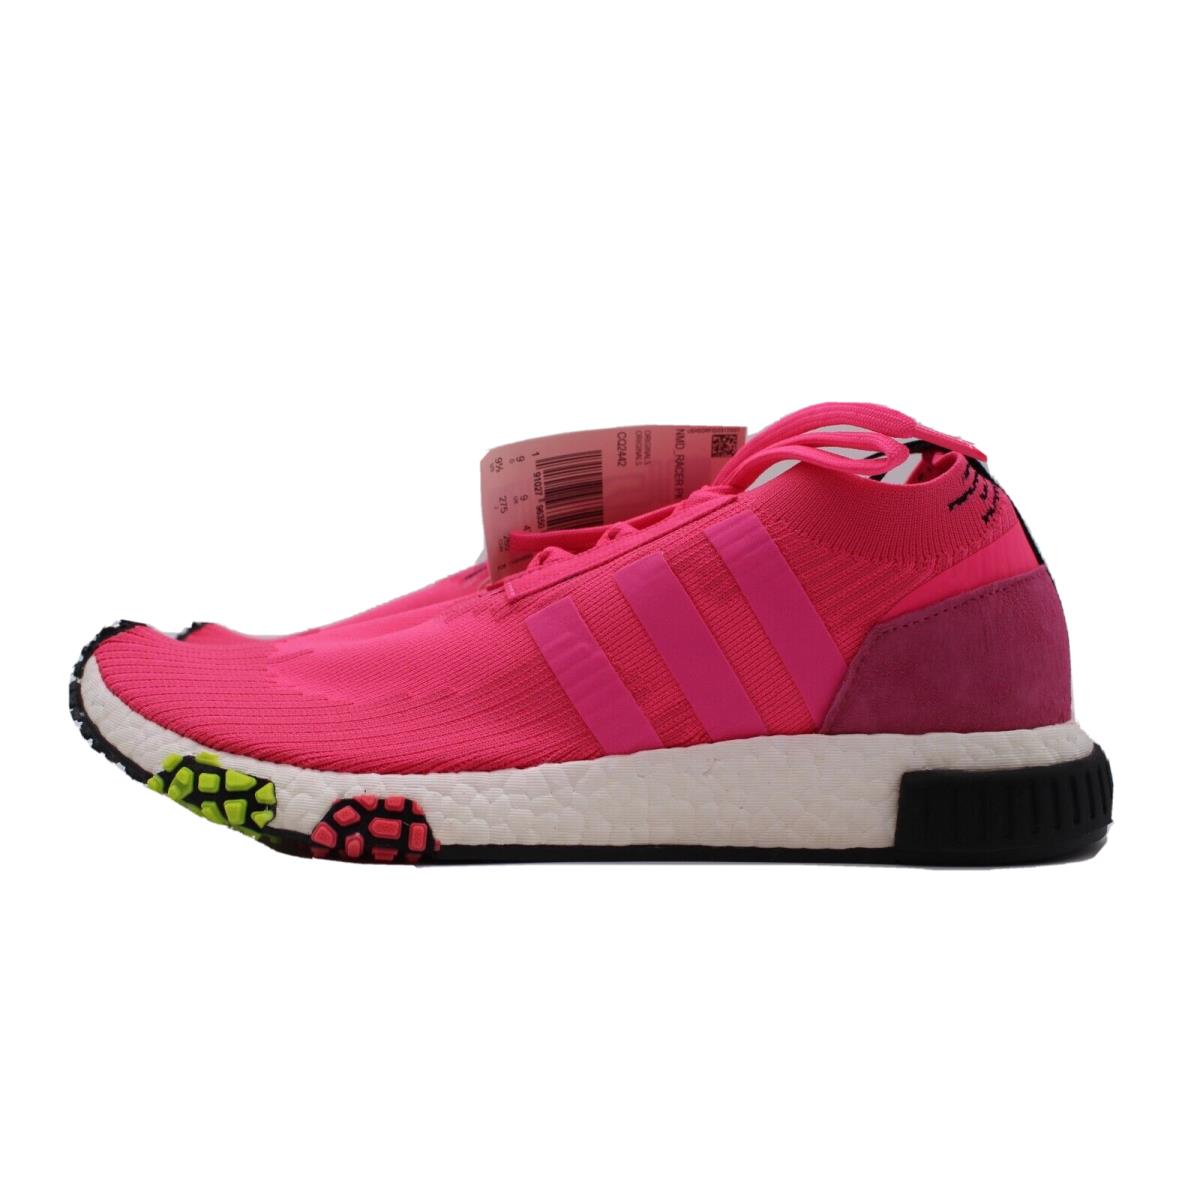 Adidas Nmd Racer PK Primeknit Pink Sneakers Shoes Casual - CQ2442 - Men`s Sizes